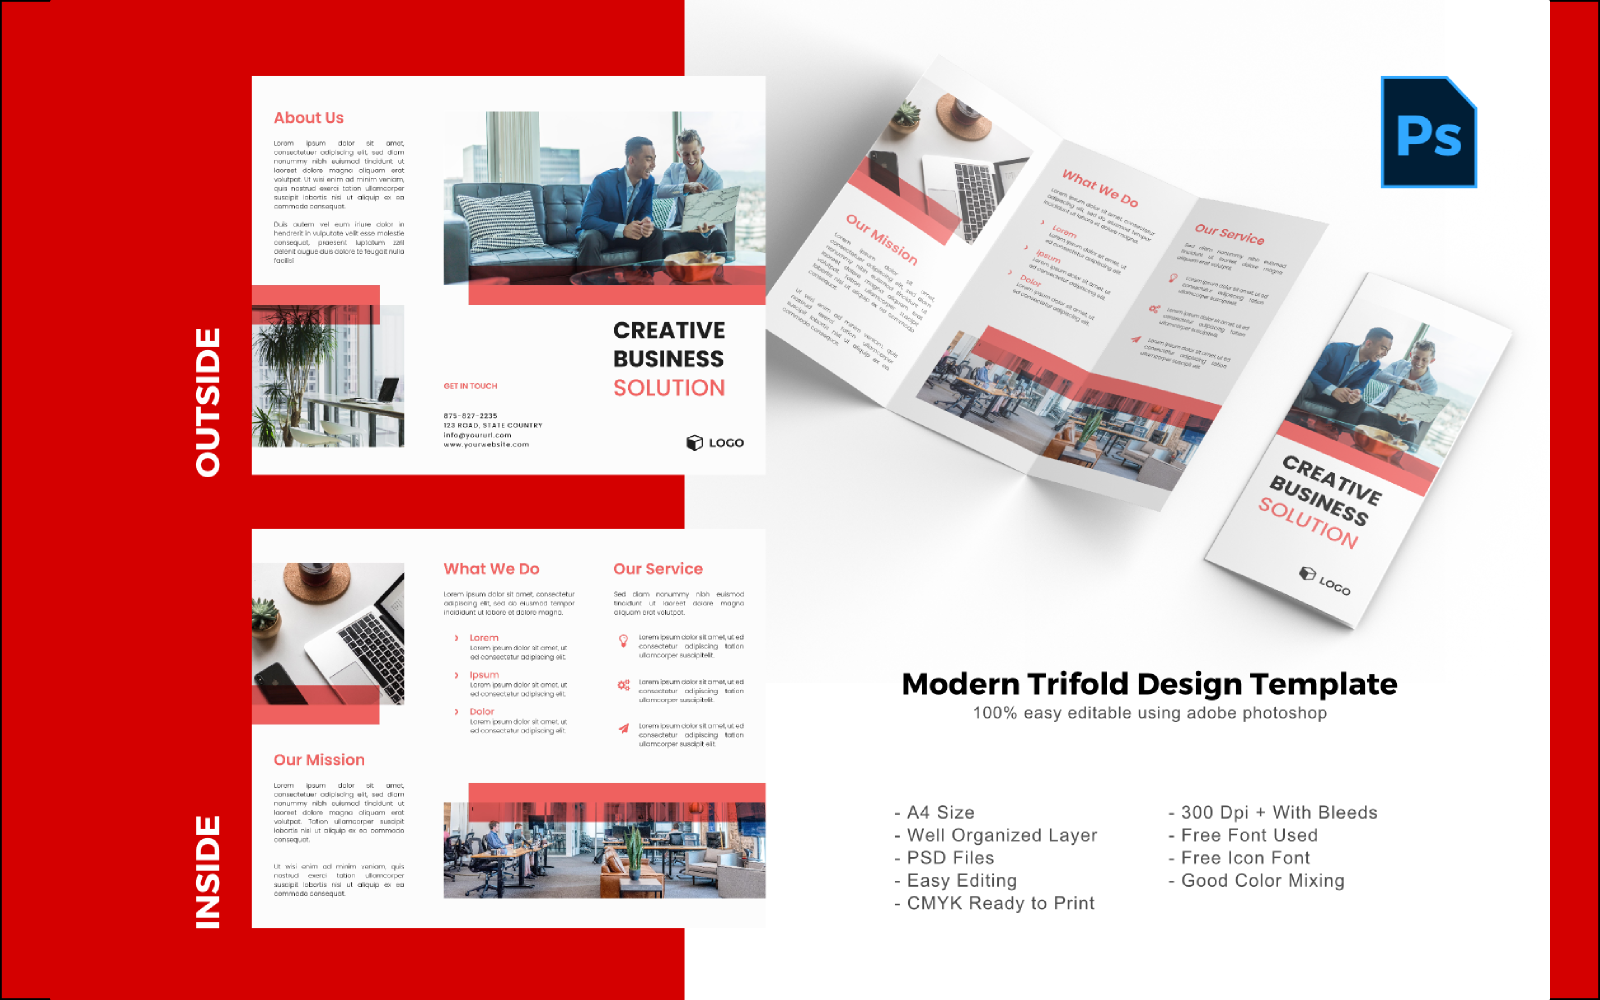 Creative Solutions Trifold Brochure PSD Template